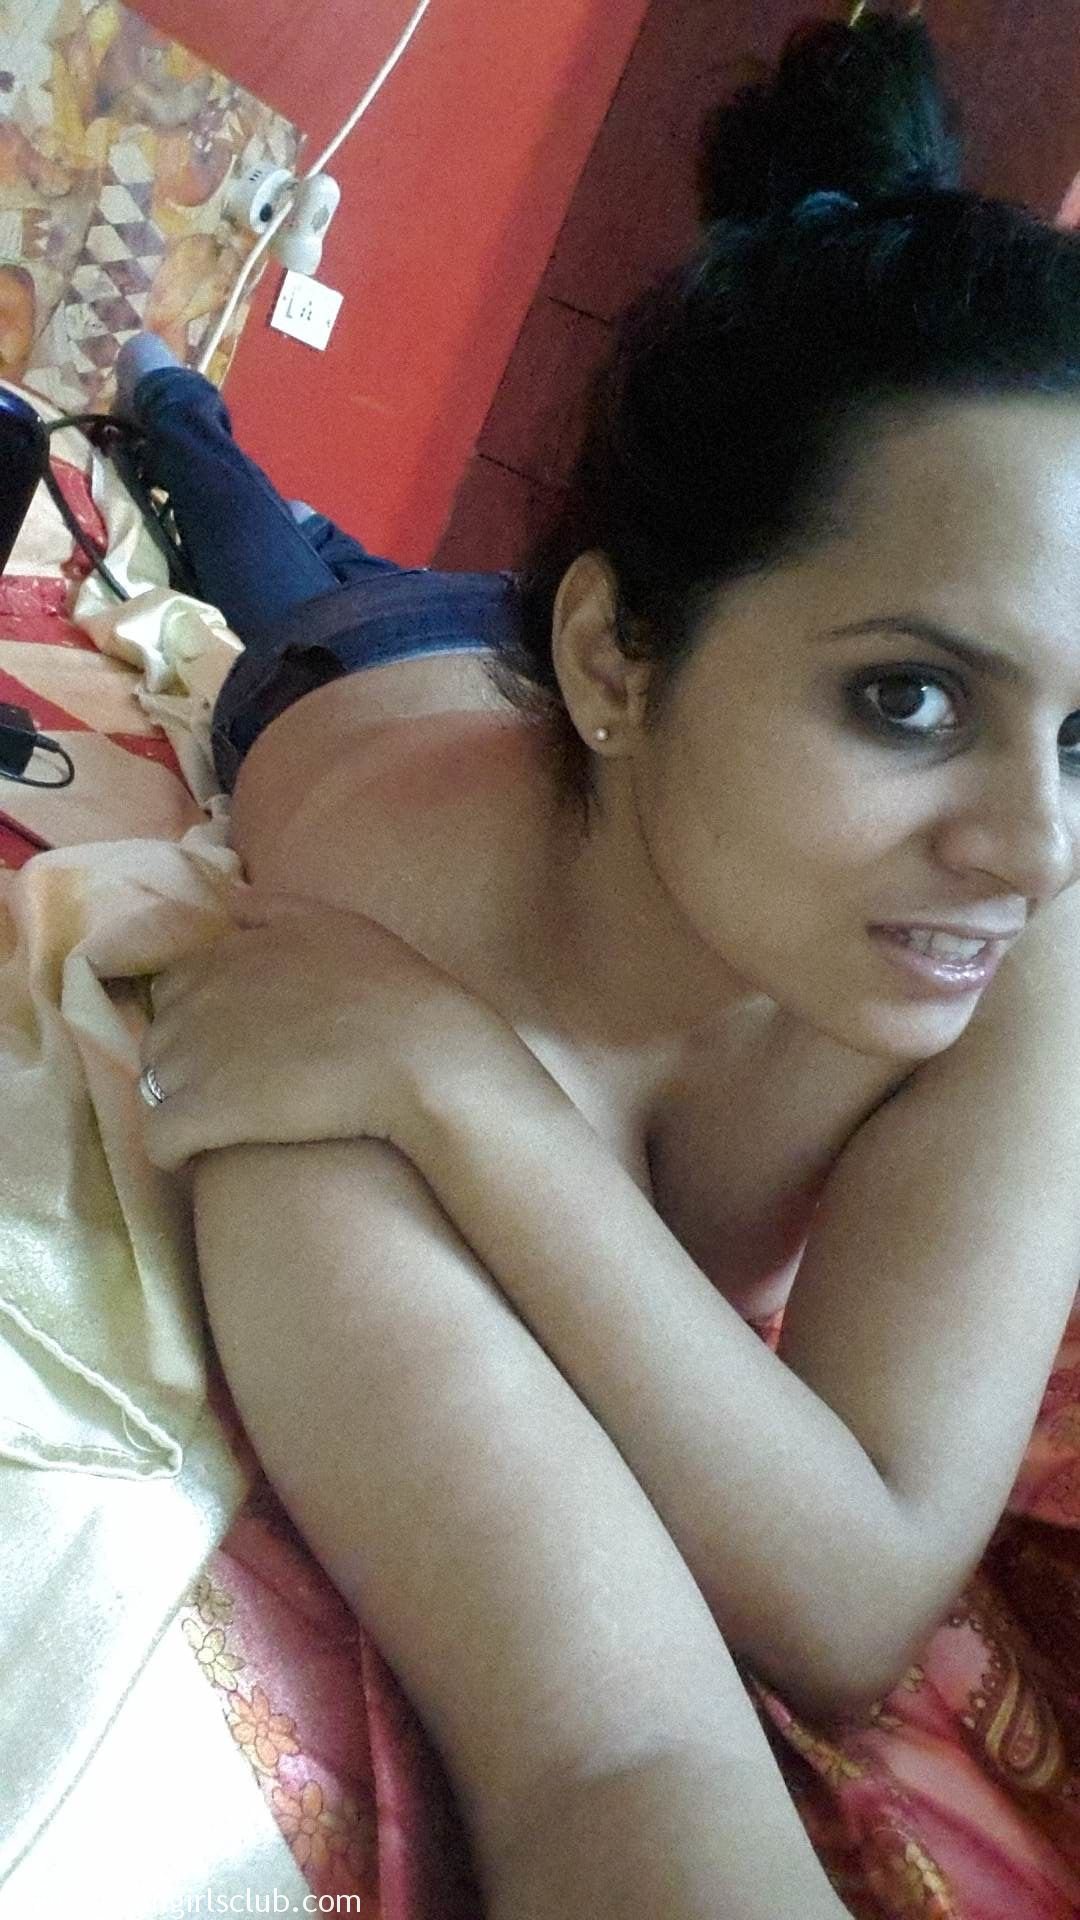 exclusive indian gf porn13 - Indian Girls Club - Nude Indian Girls & Hot  Sexy Indian Babes